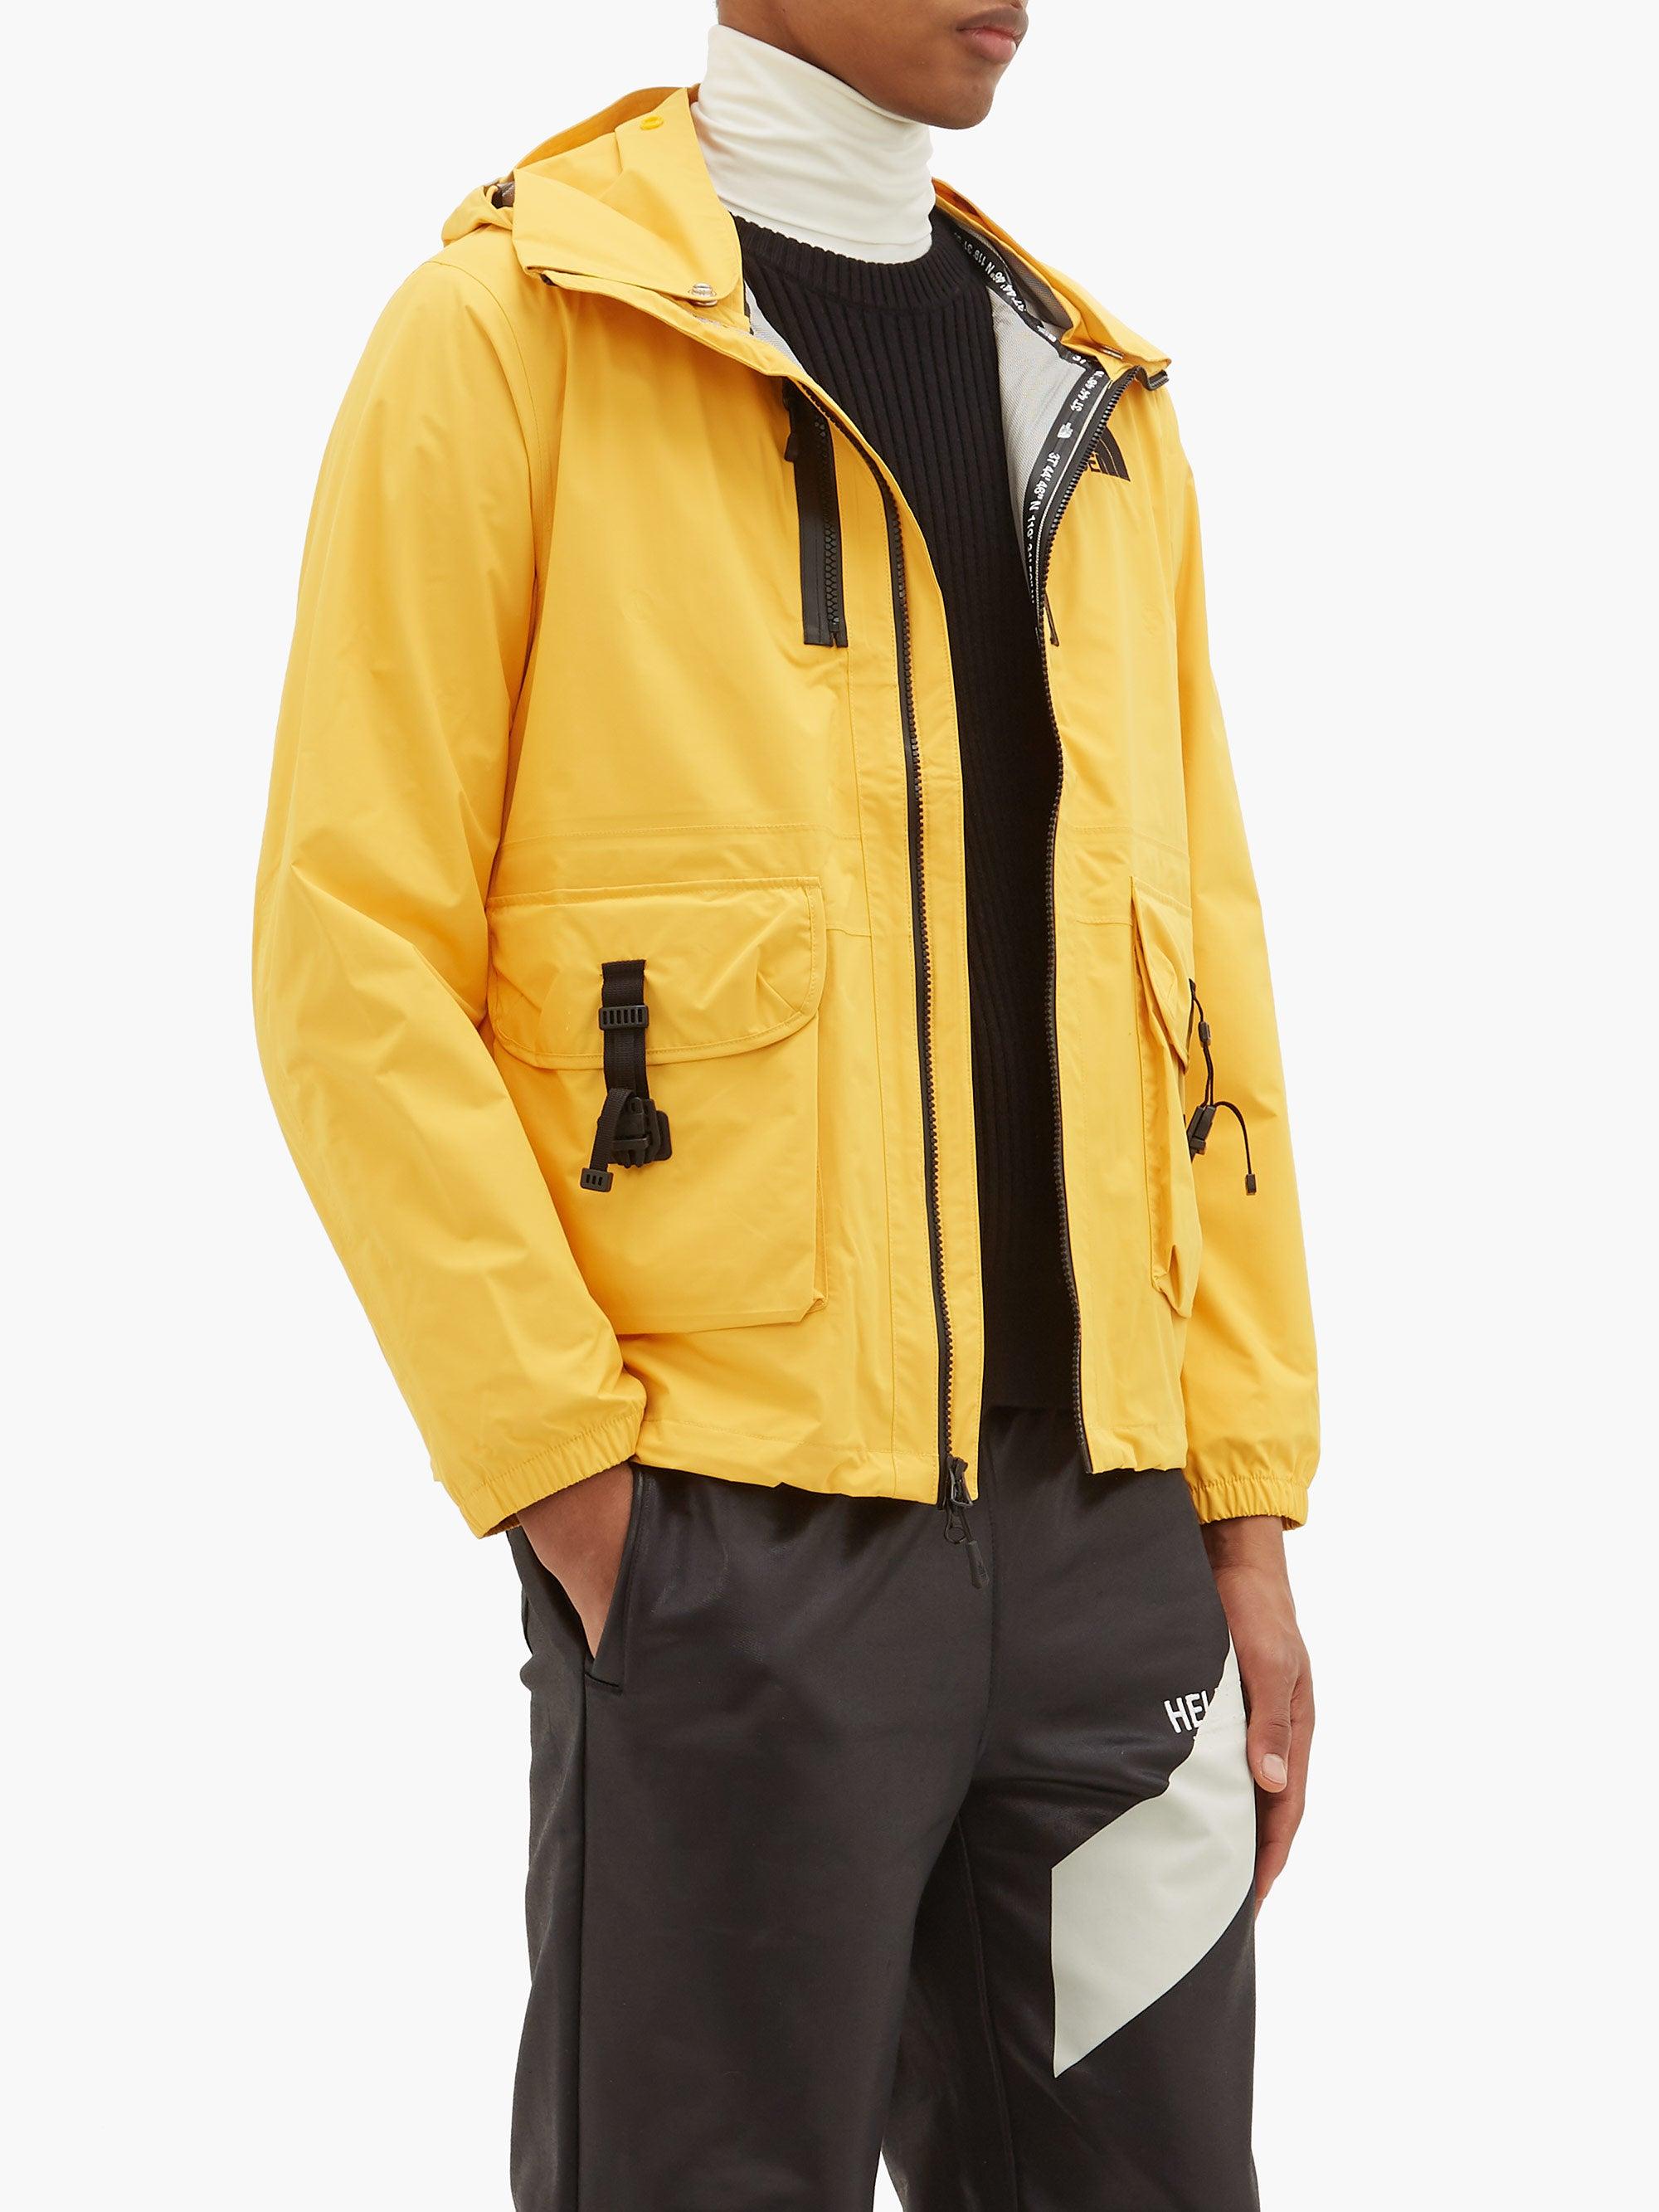 THE NORTH FACE BLACK SERIES X Kazuki Kuraishi Hooded Technical Jacket in  Yellow for Men | Lyst Canada